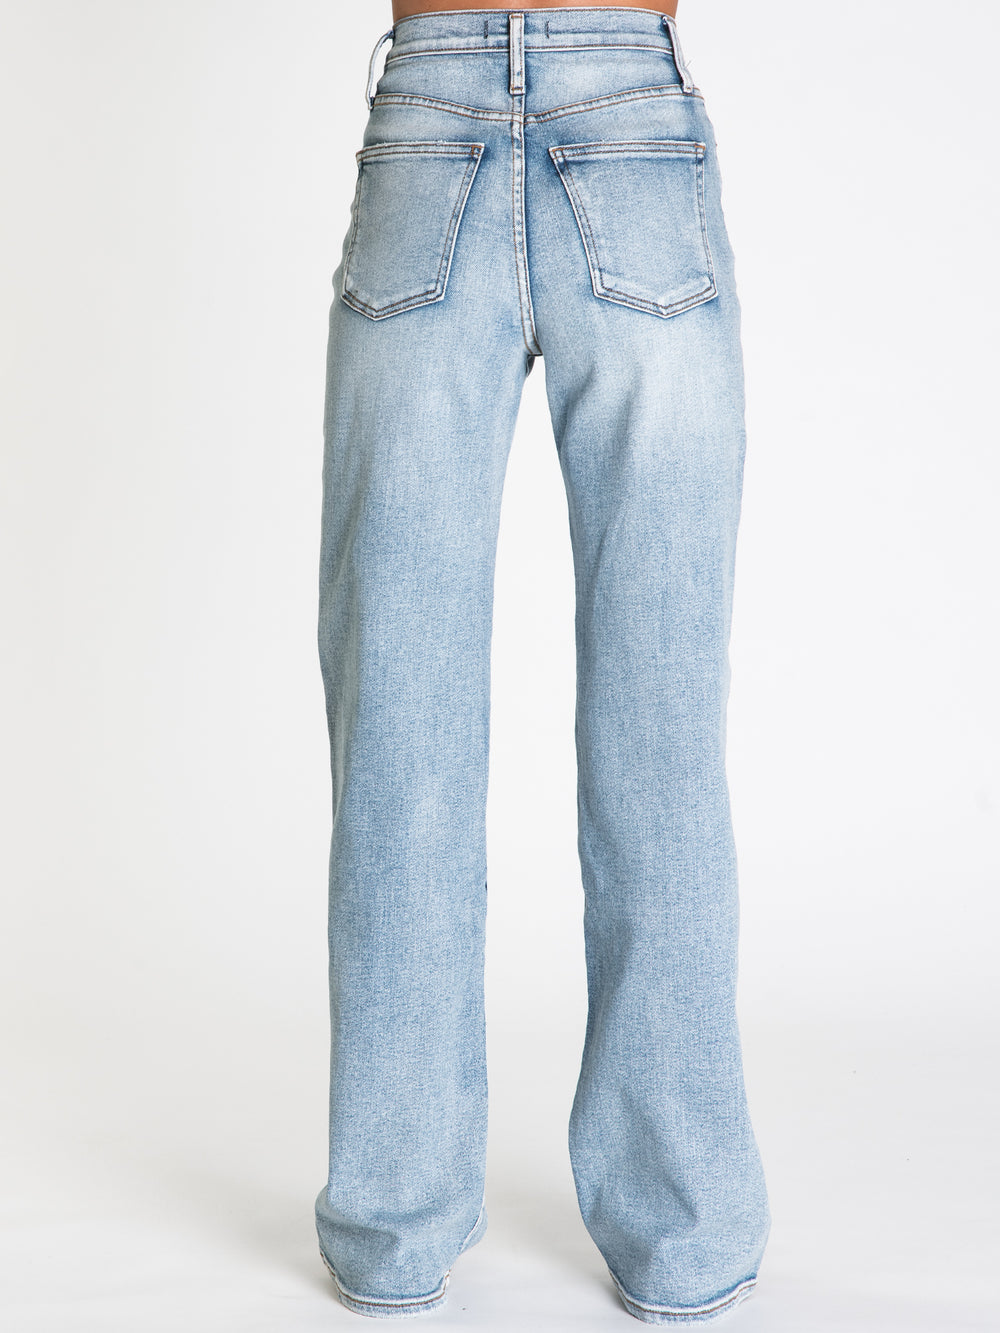 SILVER JEANS 33 HIGH RISE HIGHLY DESIRABLE JEAN - CLEARANCE